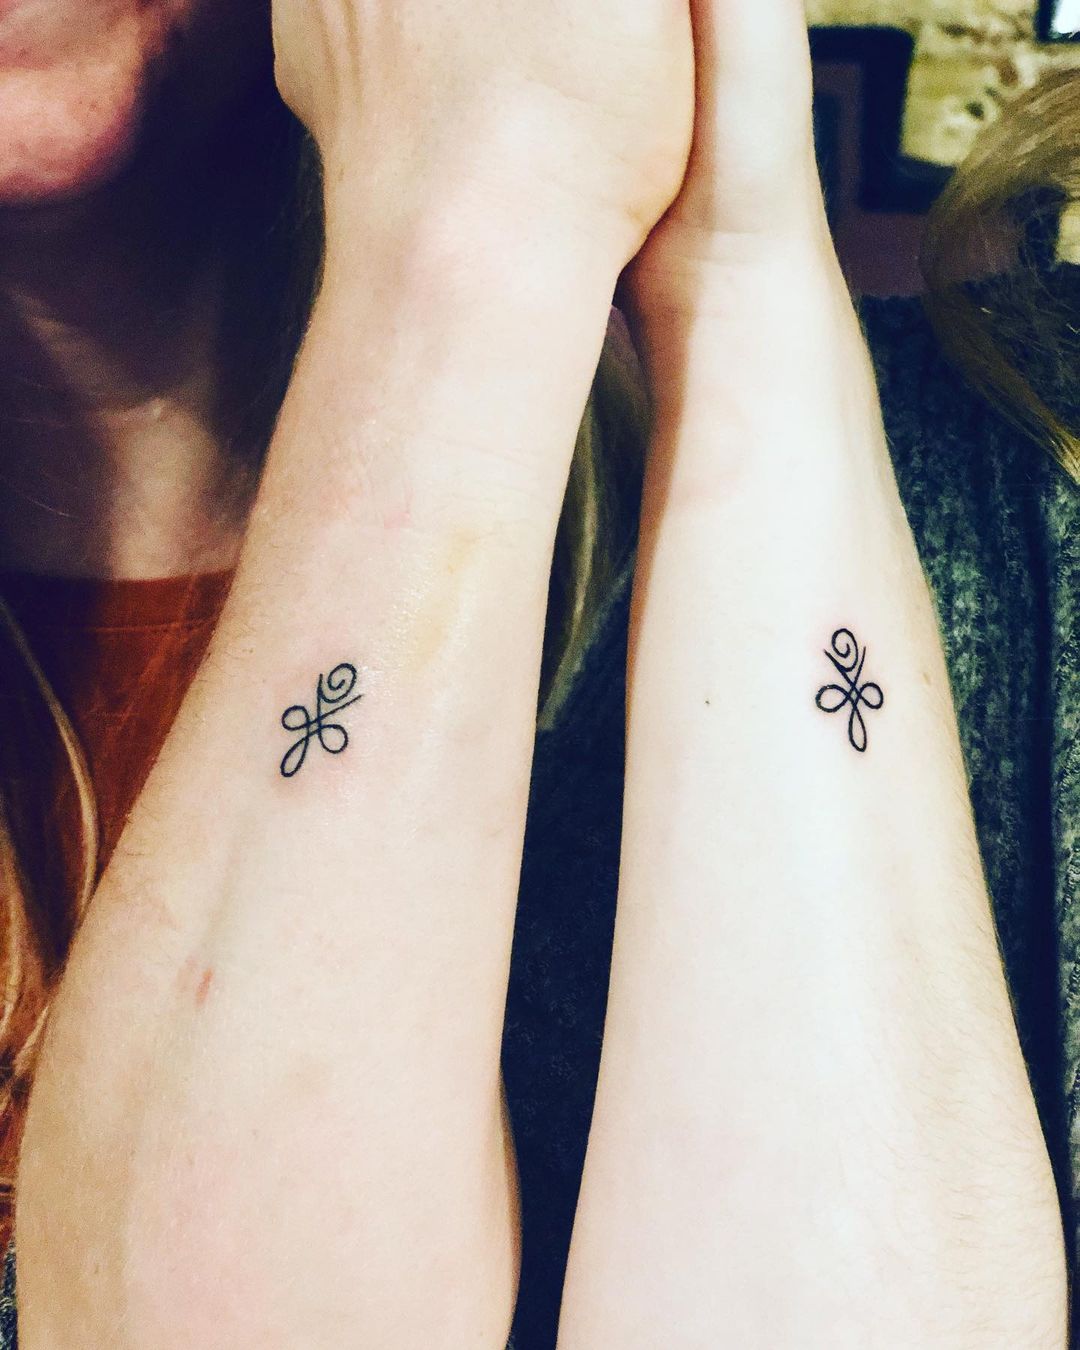 Friendship Tattoos, Tattoo Designs Gallery - Unique Pictures and Ideas